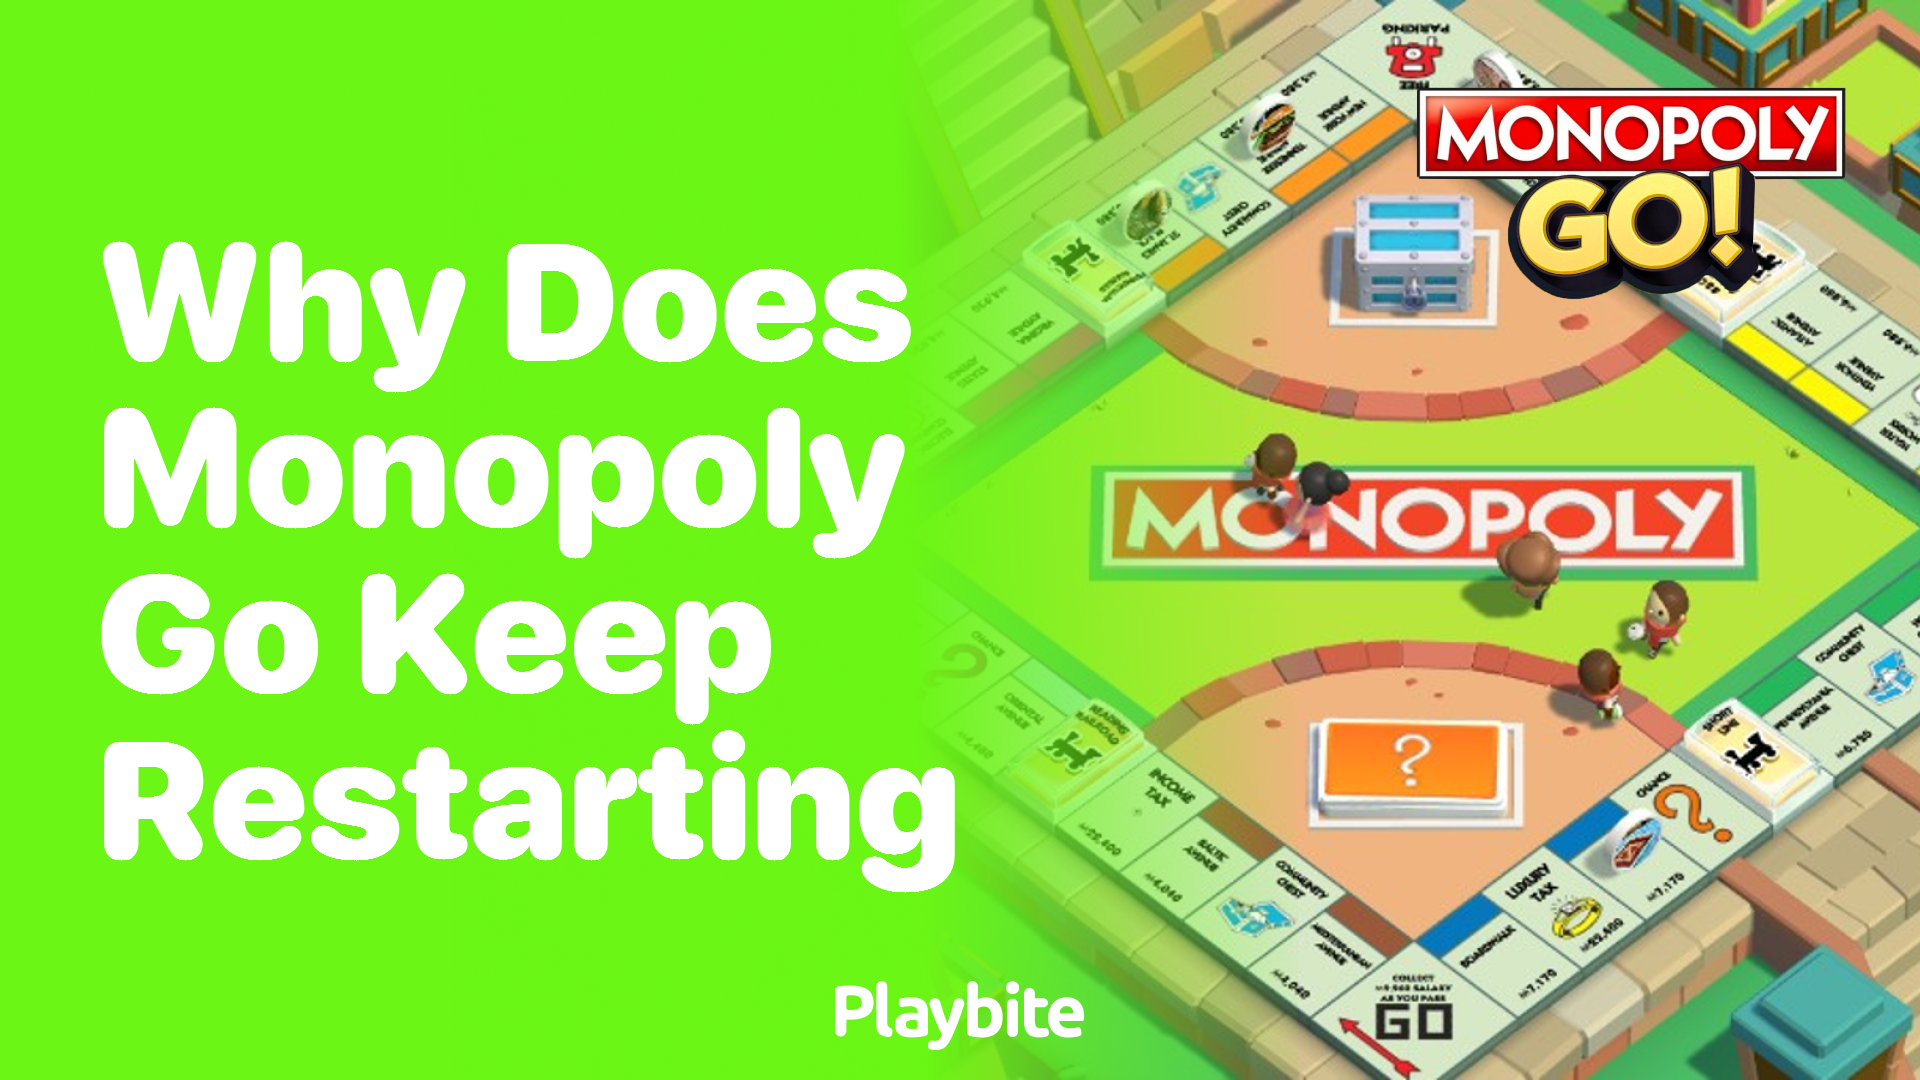 Why Does Monopoly Go Keep Restarting? Let&#8217;s Find Out!